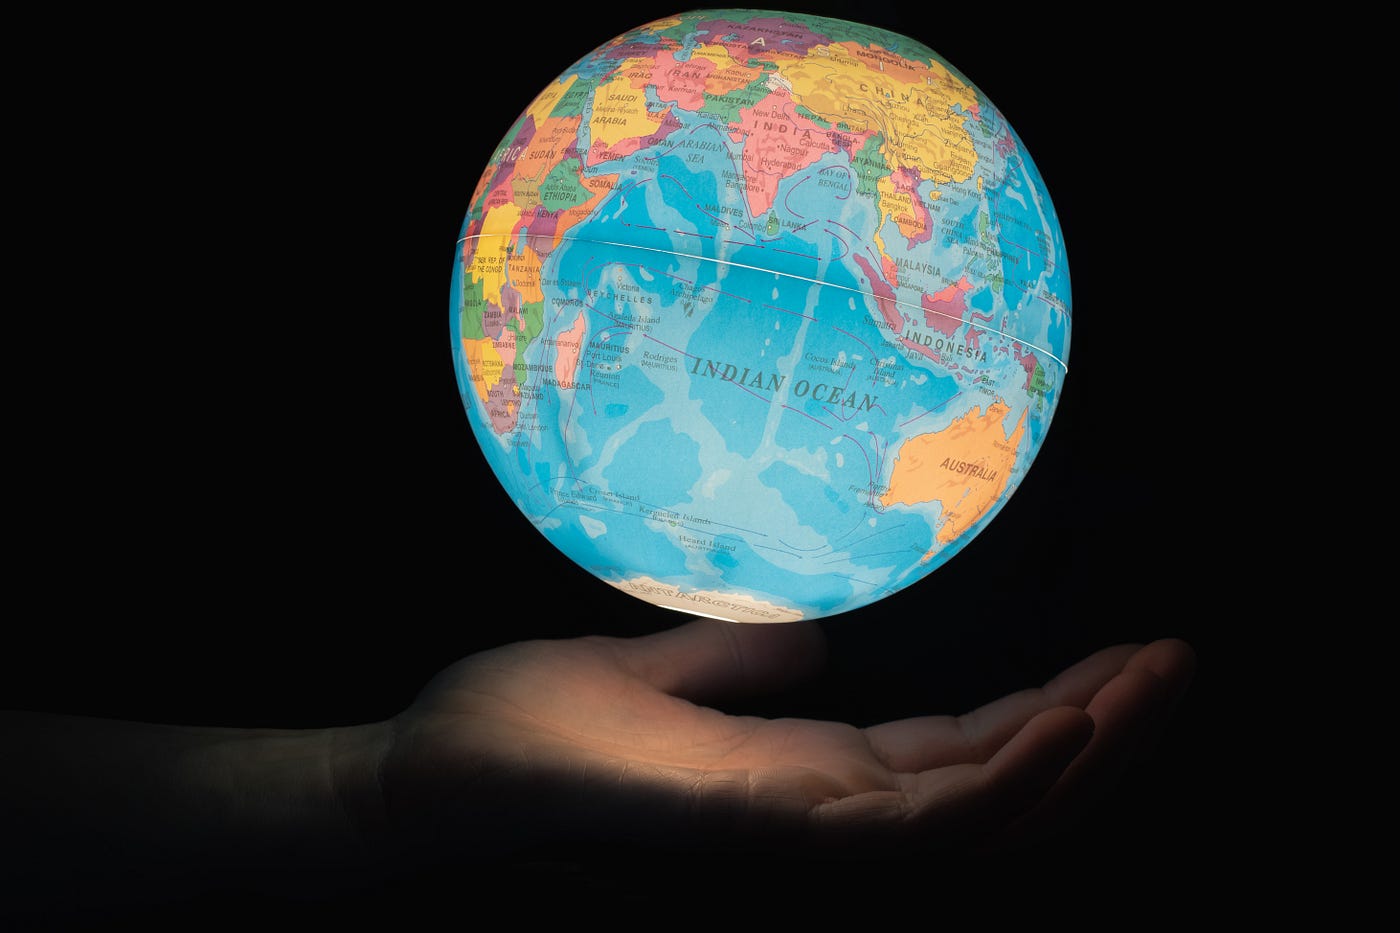 A an outstretched hand emerges from the left side of the image, with an illuminated toy globe floating above it. Black background.